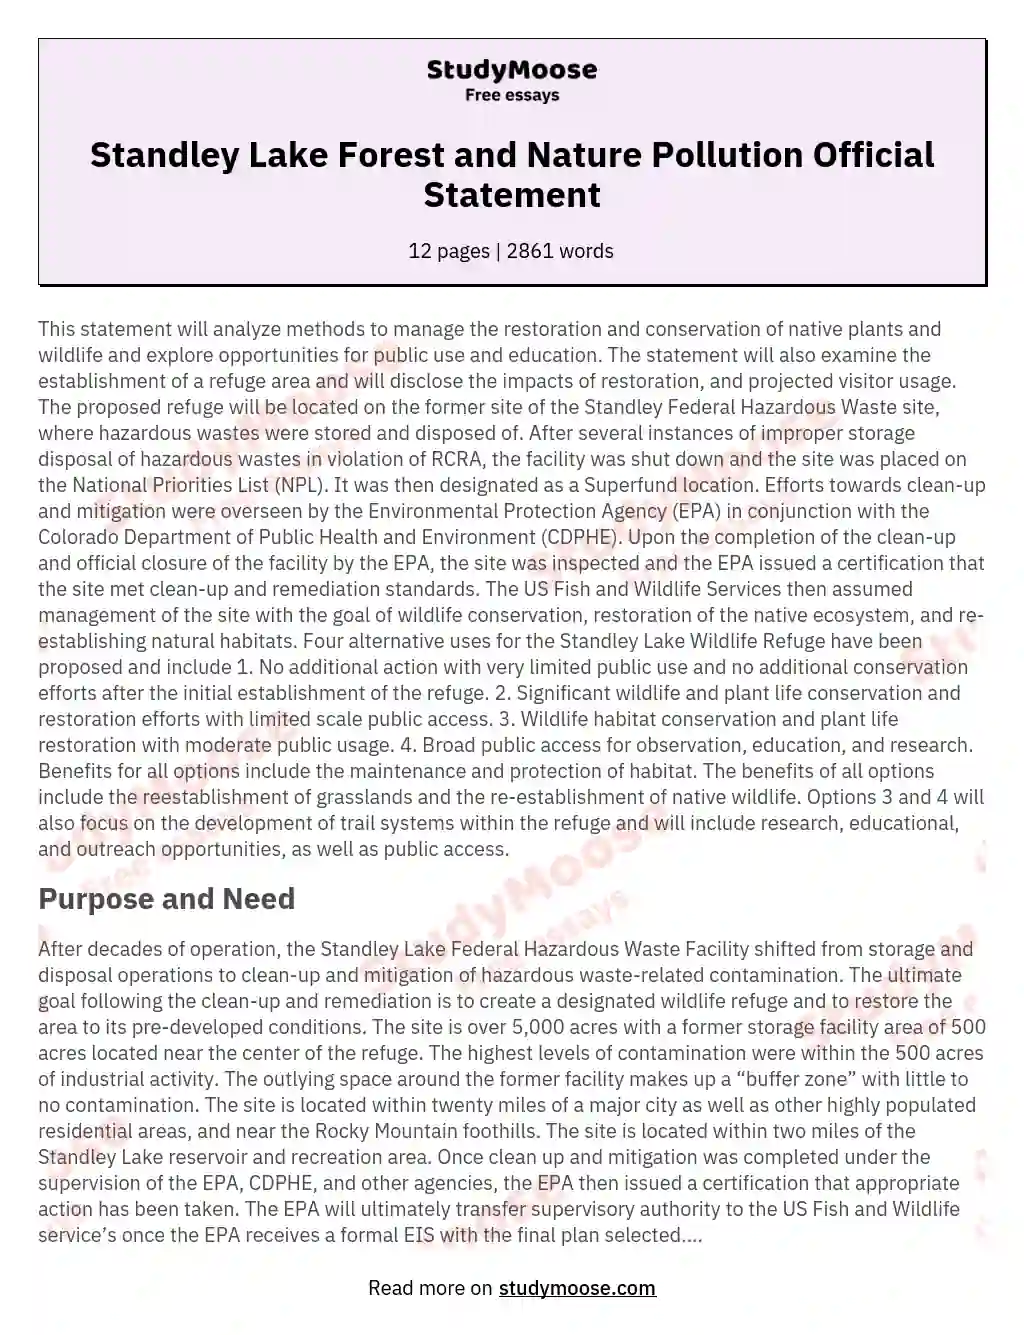 Standley Lake Forest and Nature Pollution Official Statement essay